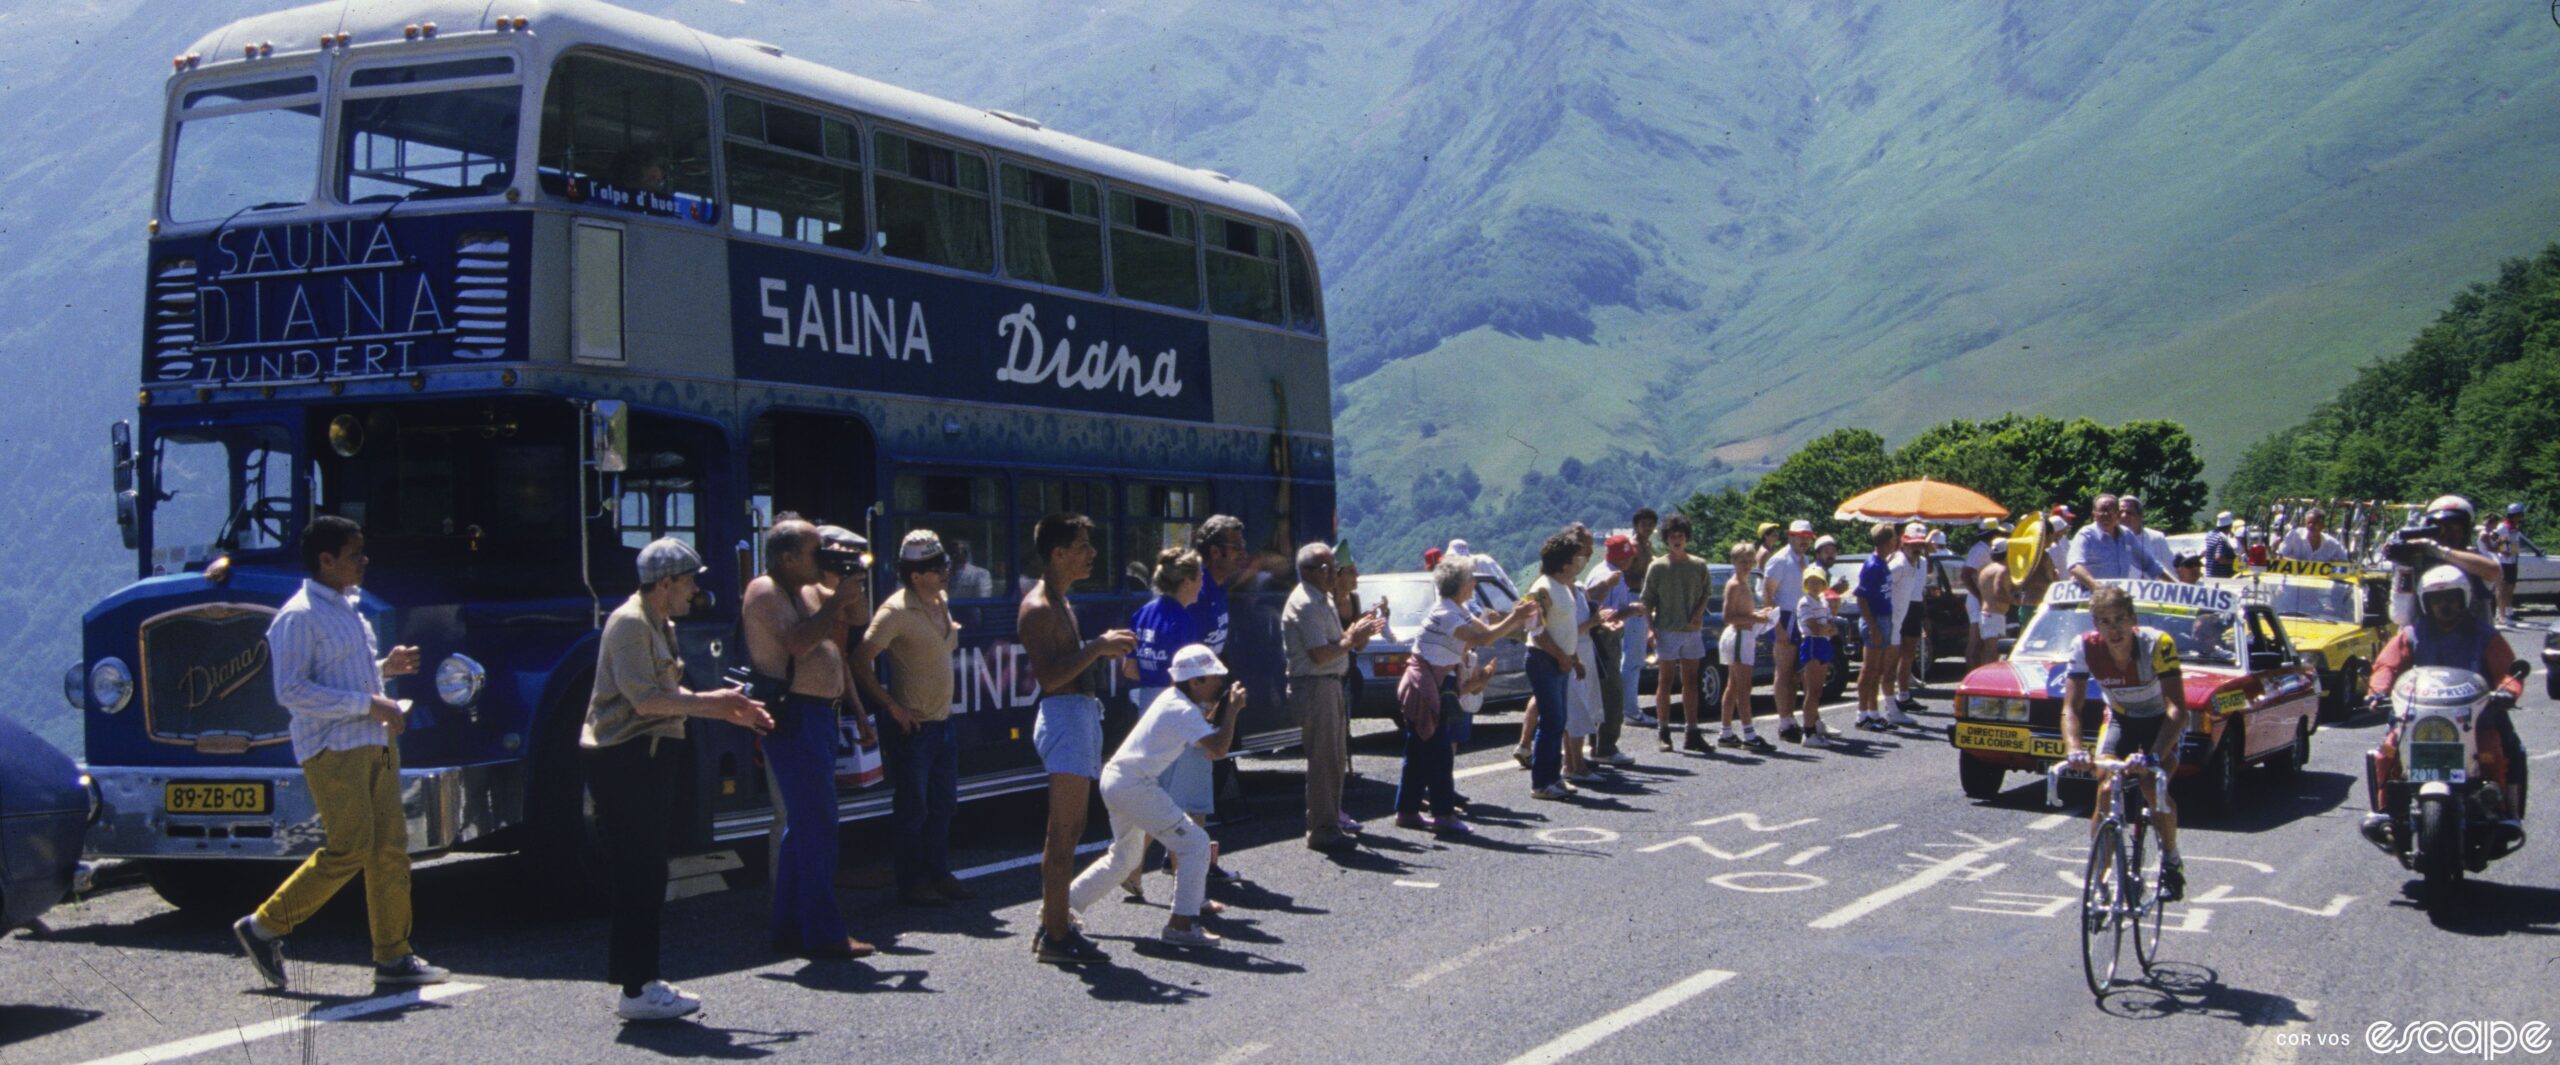 Andy Hampsten rides in the 1986 Tour de France. He's on a climb passing a double-decker bus labeled "Sauna Diana" and is followed by the red officials car and a yellow Mavic neutral support vehicle. Fans line the road to cheer.